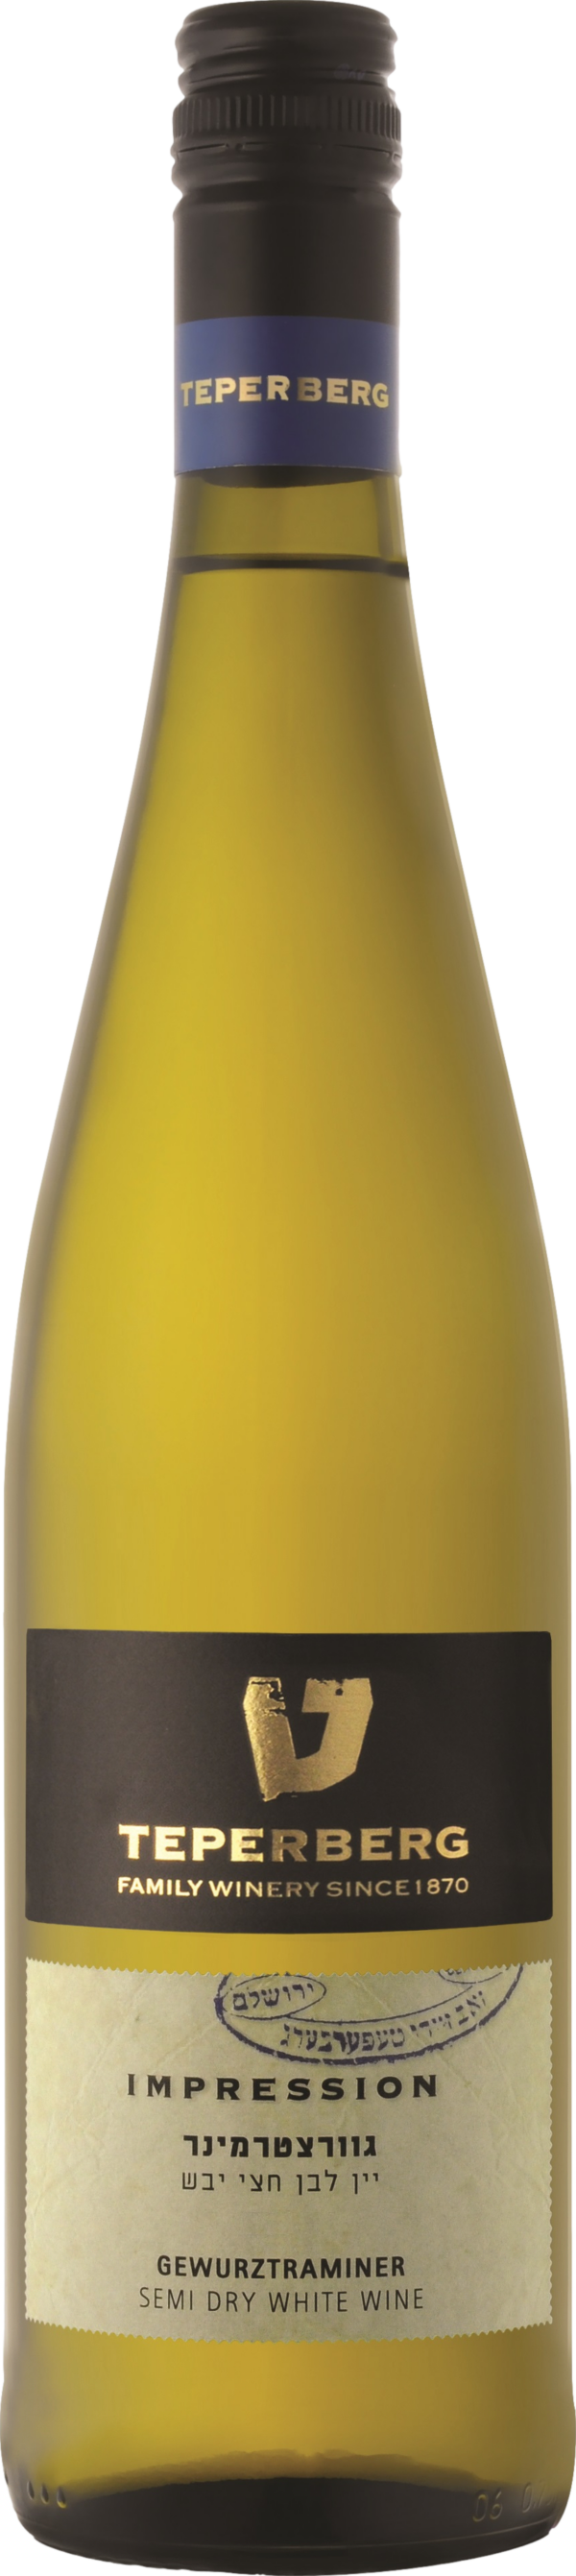 Product image of Teperberg Impression Gewurztraminer 2021 from 8wines